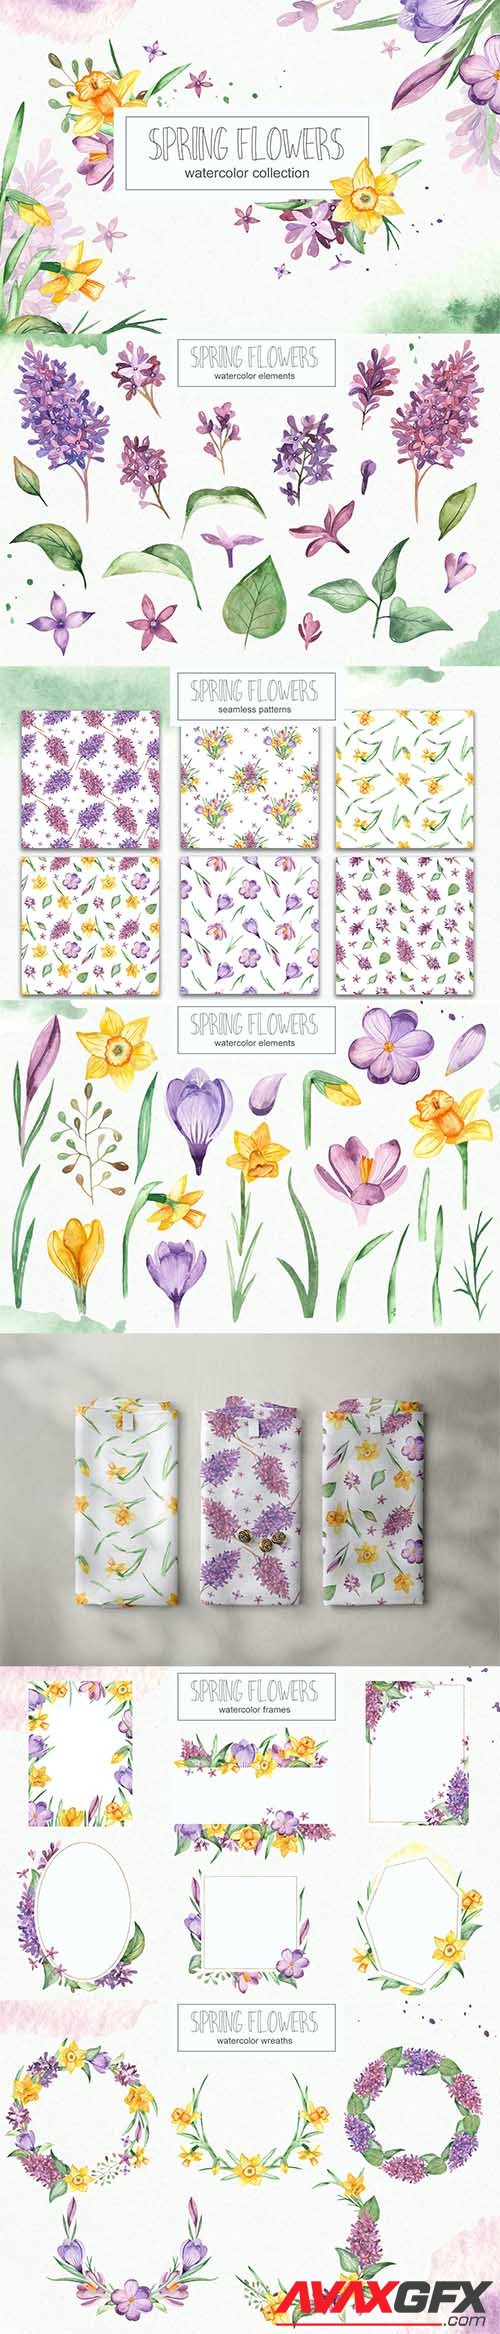 Watercolor spring flowers collection